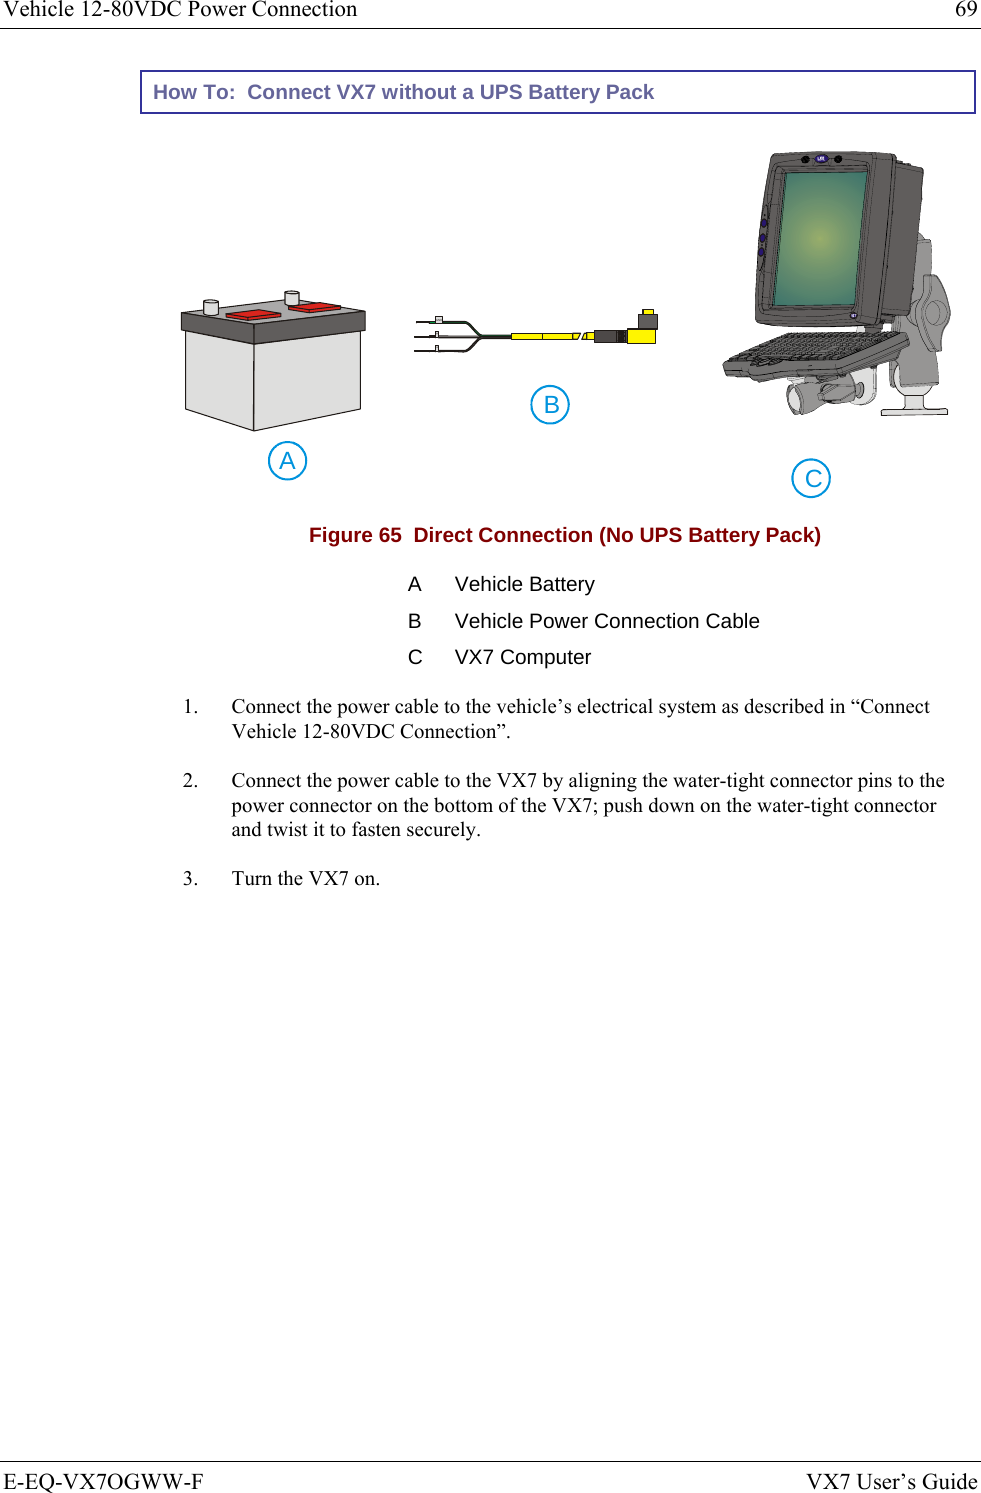 Vehicle 12-80VDC Power Connection  69 E-EQ-VX7OGWW-F  VX7 User’s Guide How To:  Connect VX7 without a UPS Battery Pack CAB  GND+- Figure 65  Direct Connection (No UPS Battery Pack) A Vehicle Battery B  Vehicle Power Connection Cable C VX7 Computer 1.  Connect the power cable to the vehicle’s electrical system as described in “Connect Vehicle 12-80VDC Connection”. 2.  Connect the power cable to the VX7 by aligning the water-tight connector pins to the power connector on the bottom of the VX7; push down on the water-tight connector and twist it to fasten securely. 3.  Turn the VX7 on. 